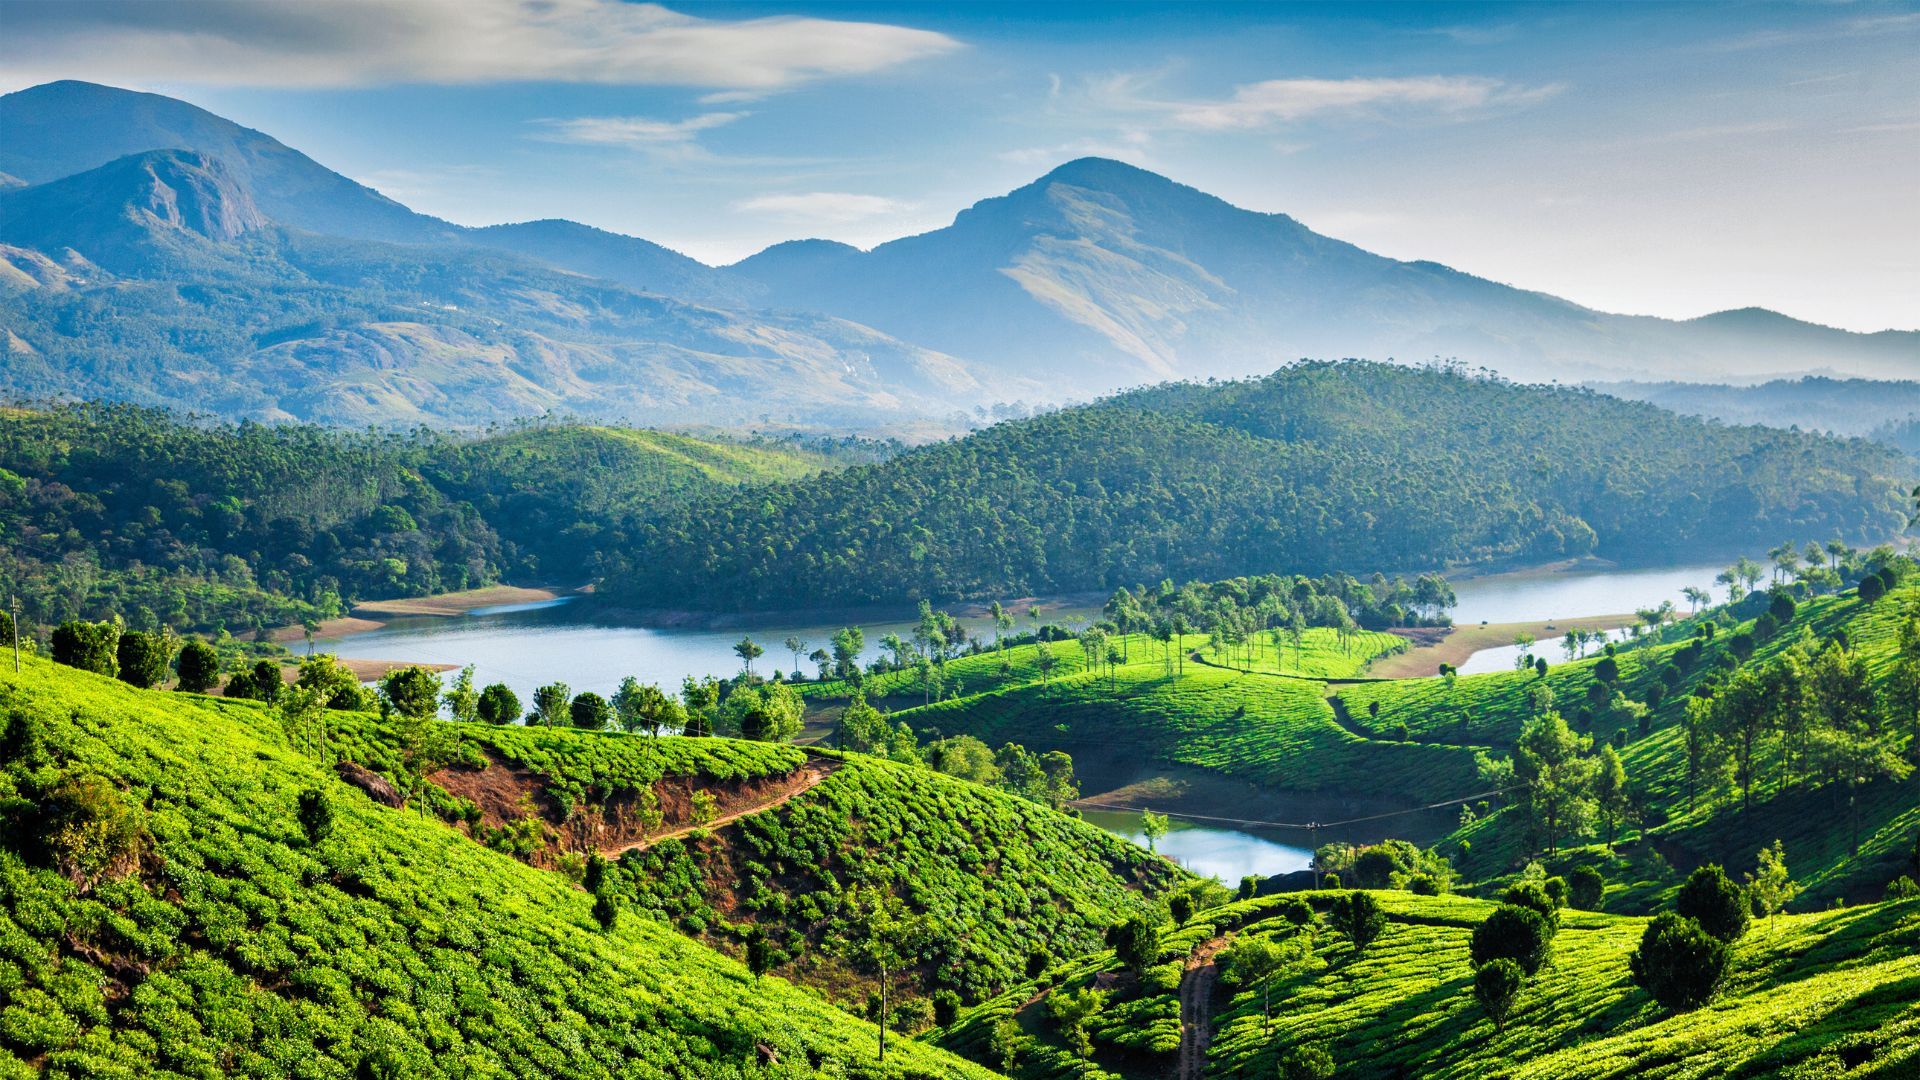 Bookmark These Best Places To Visit In Munnar For Your Next Holiday